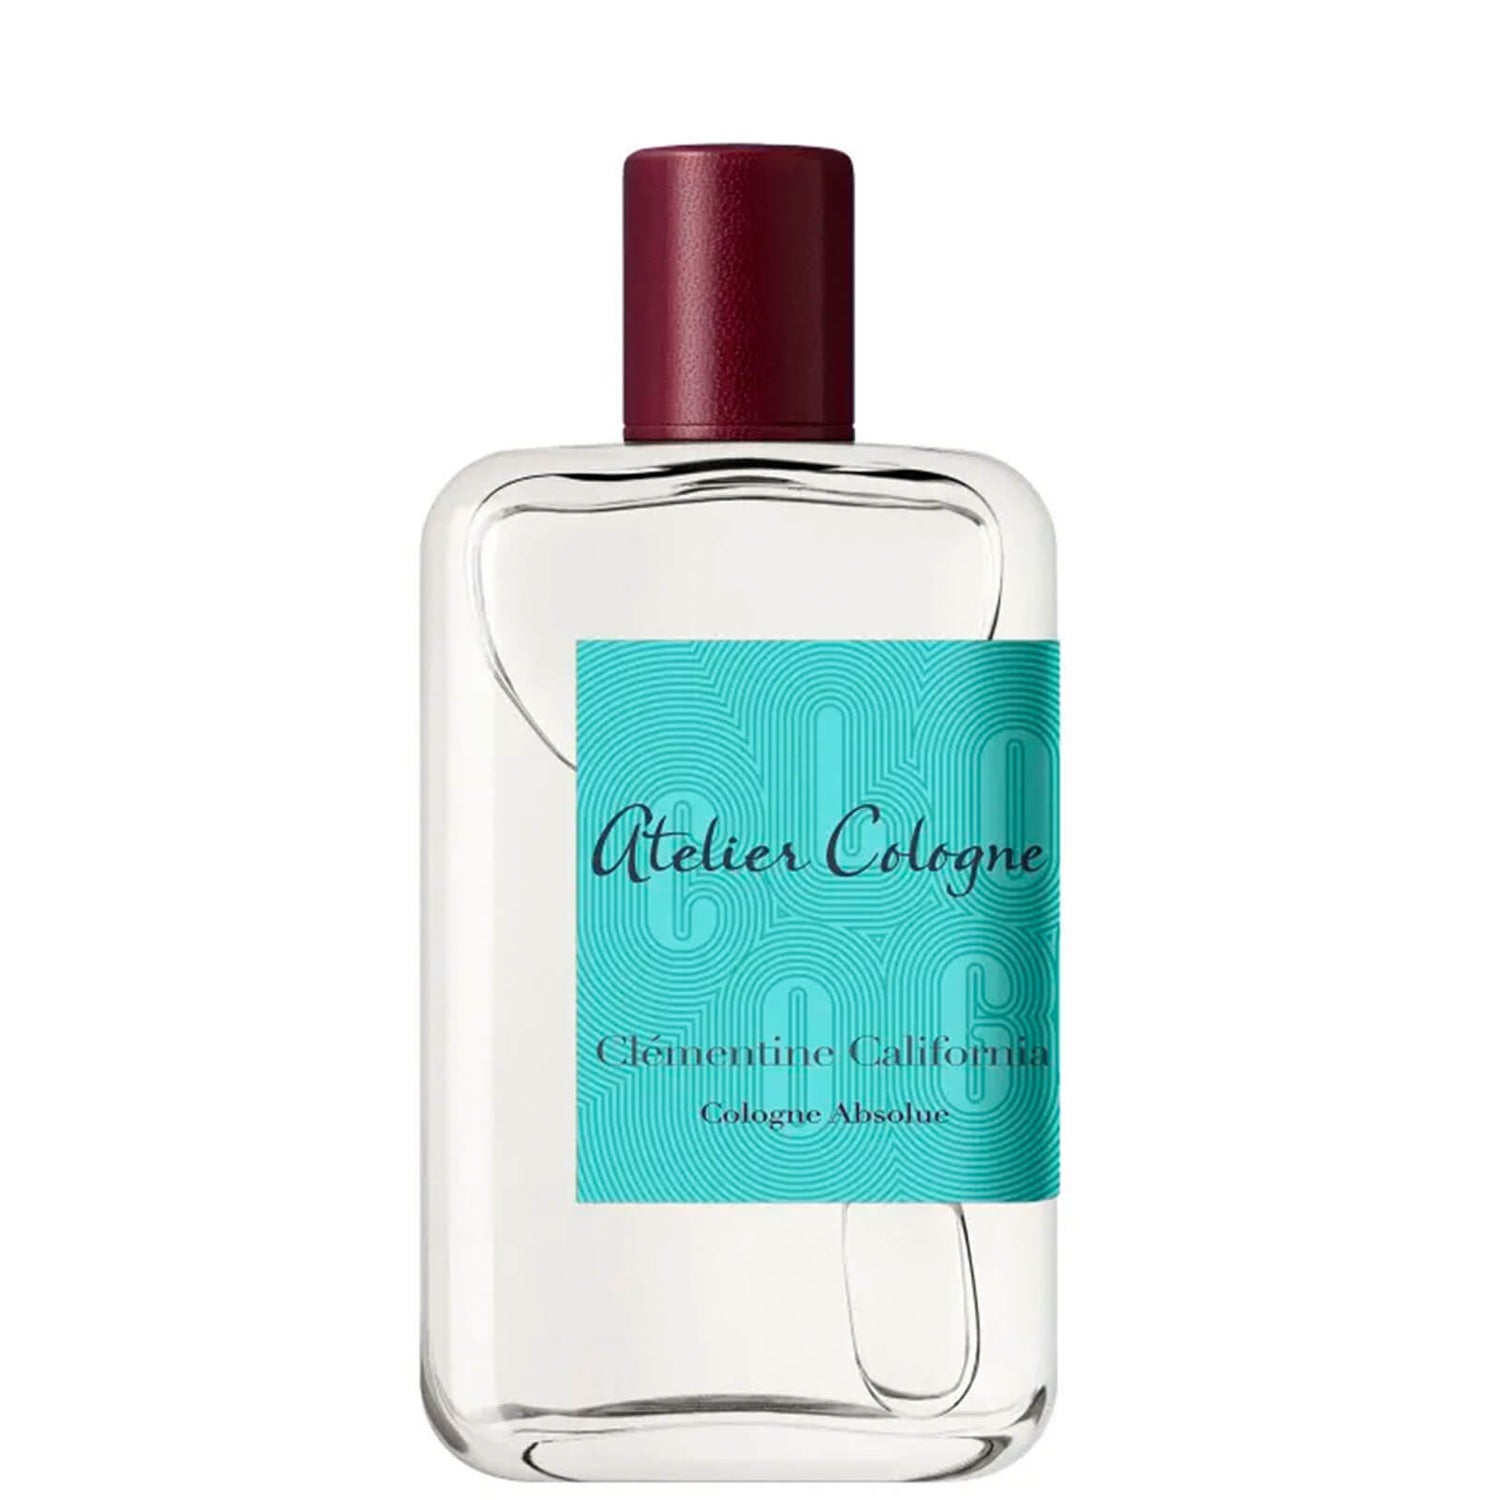 Atelier Cologne Clémentine California Cologne Absolue 200ml